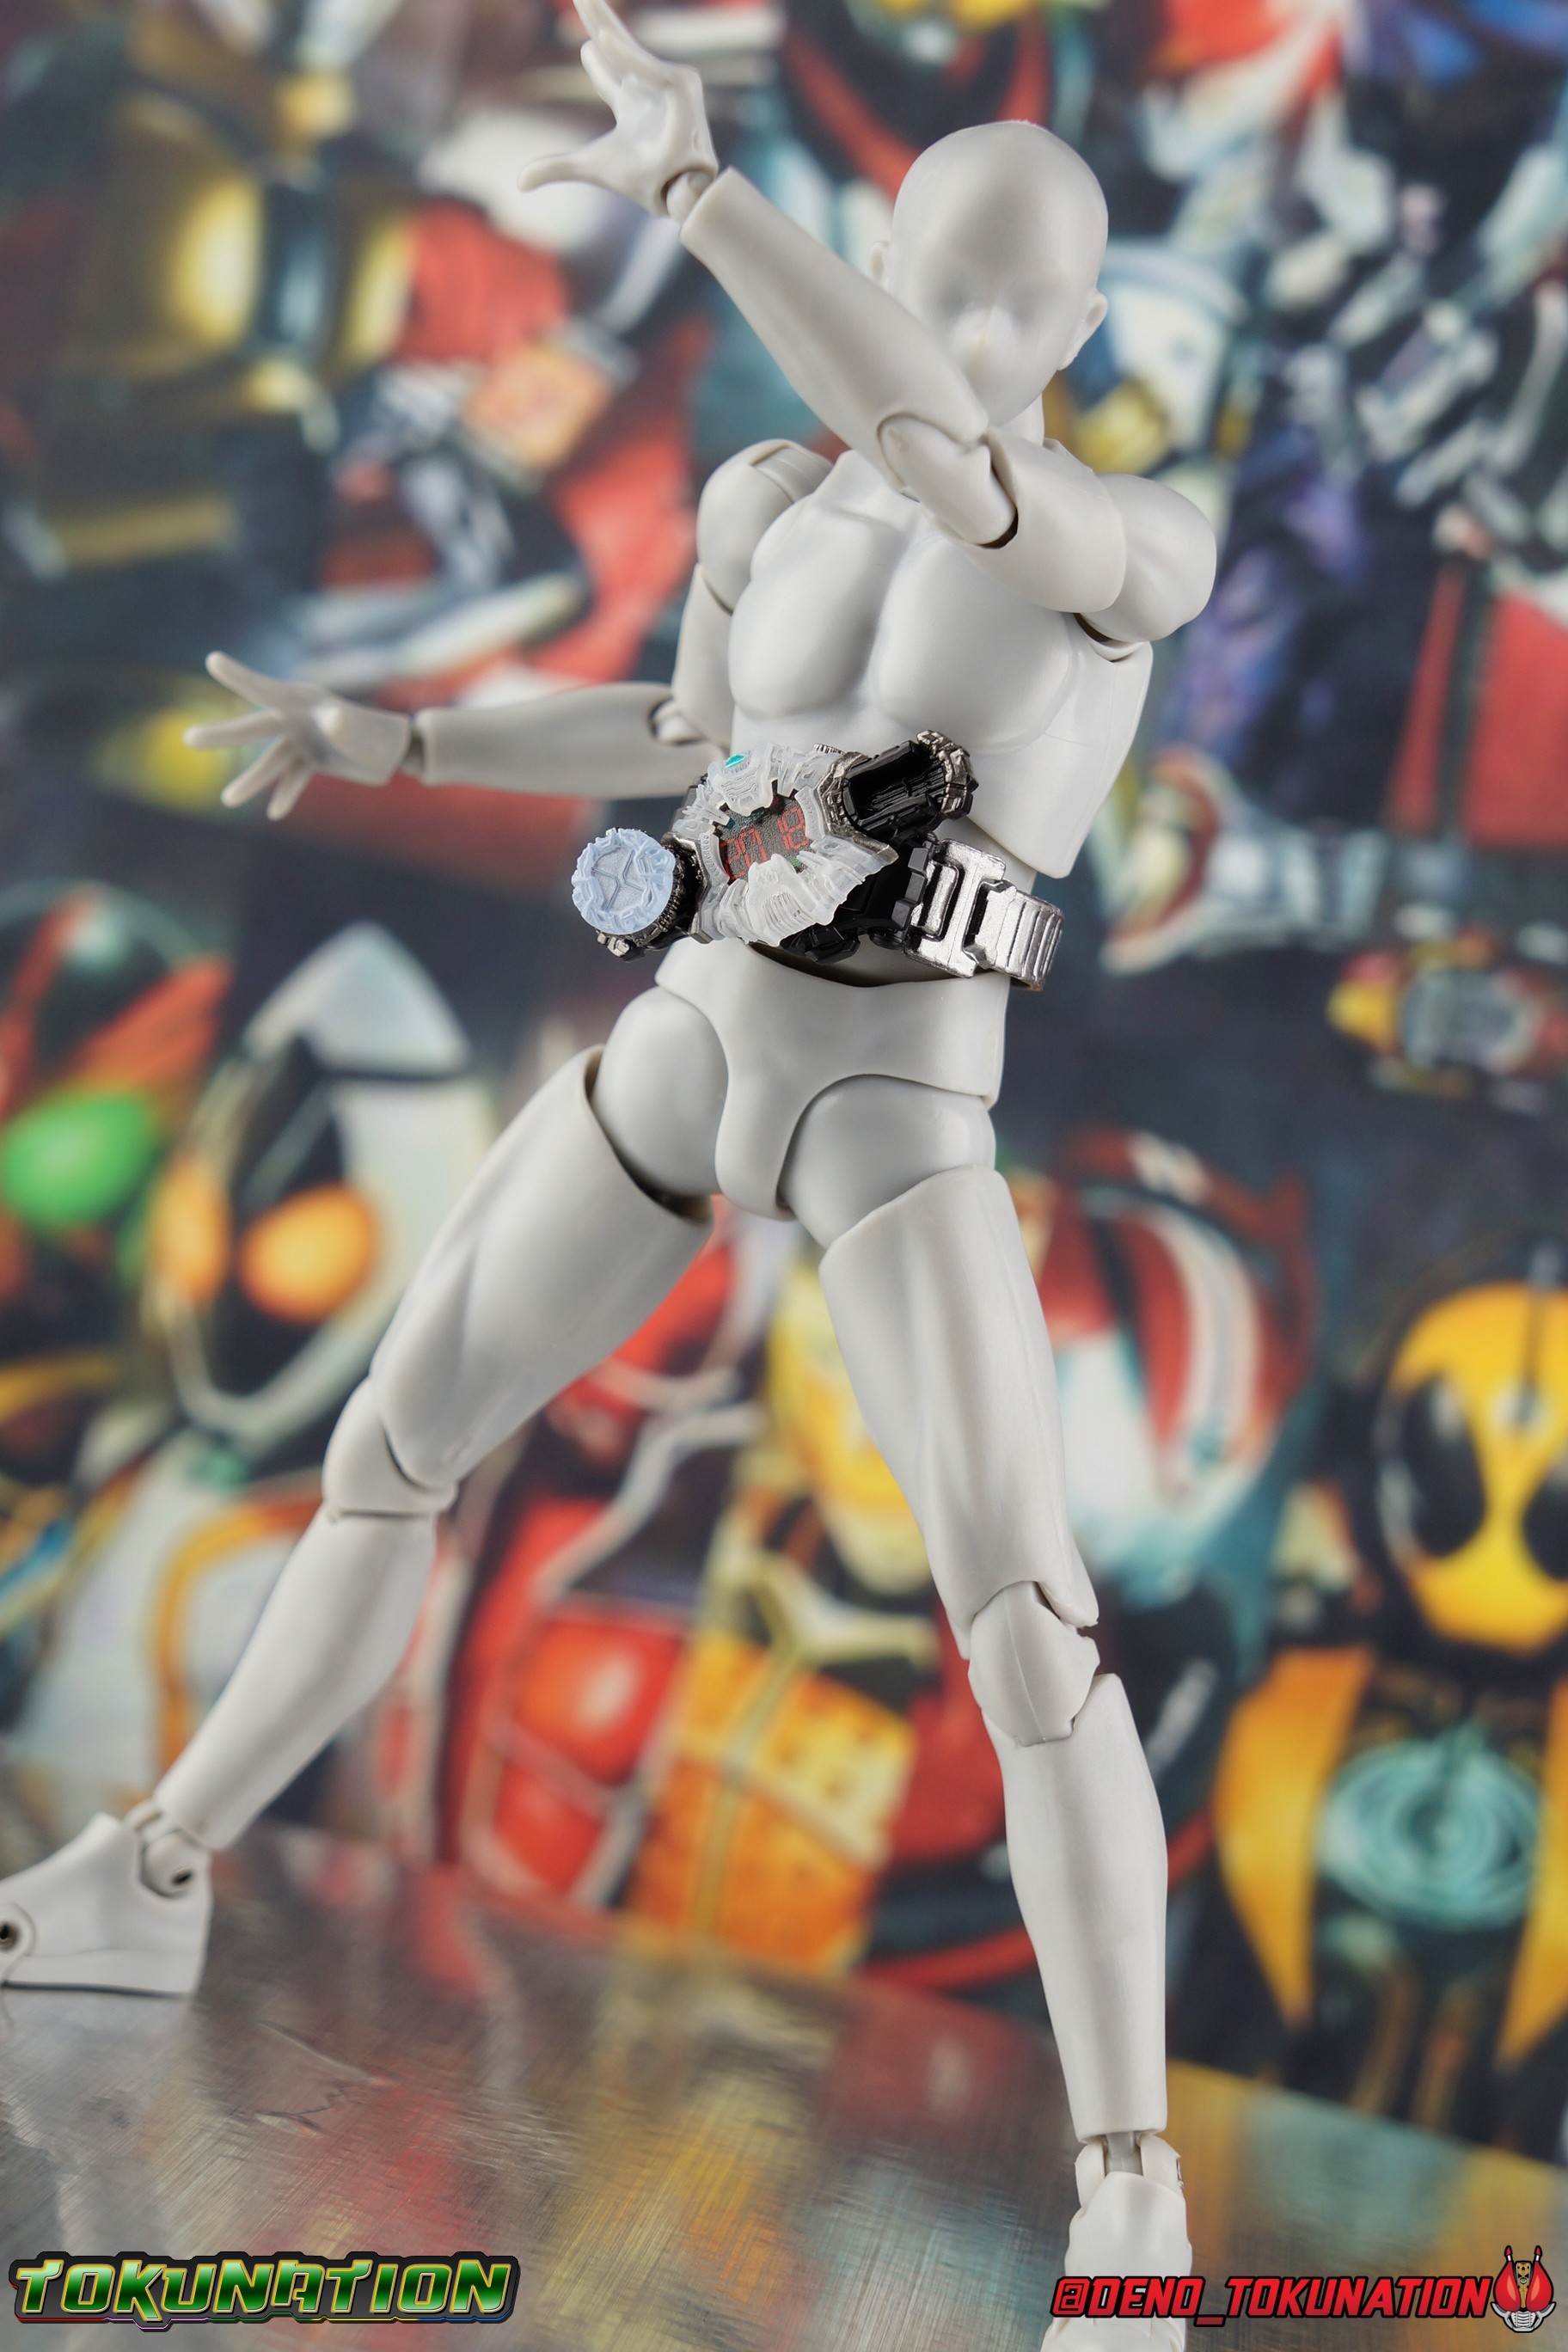 S.H. Figuarts Kamen Rider Zi-O Gallery & Review - Tokunation